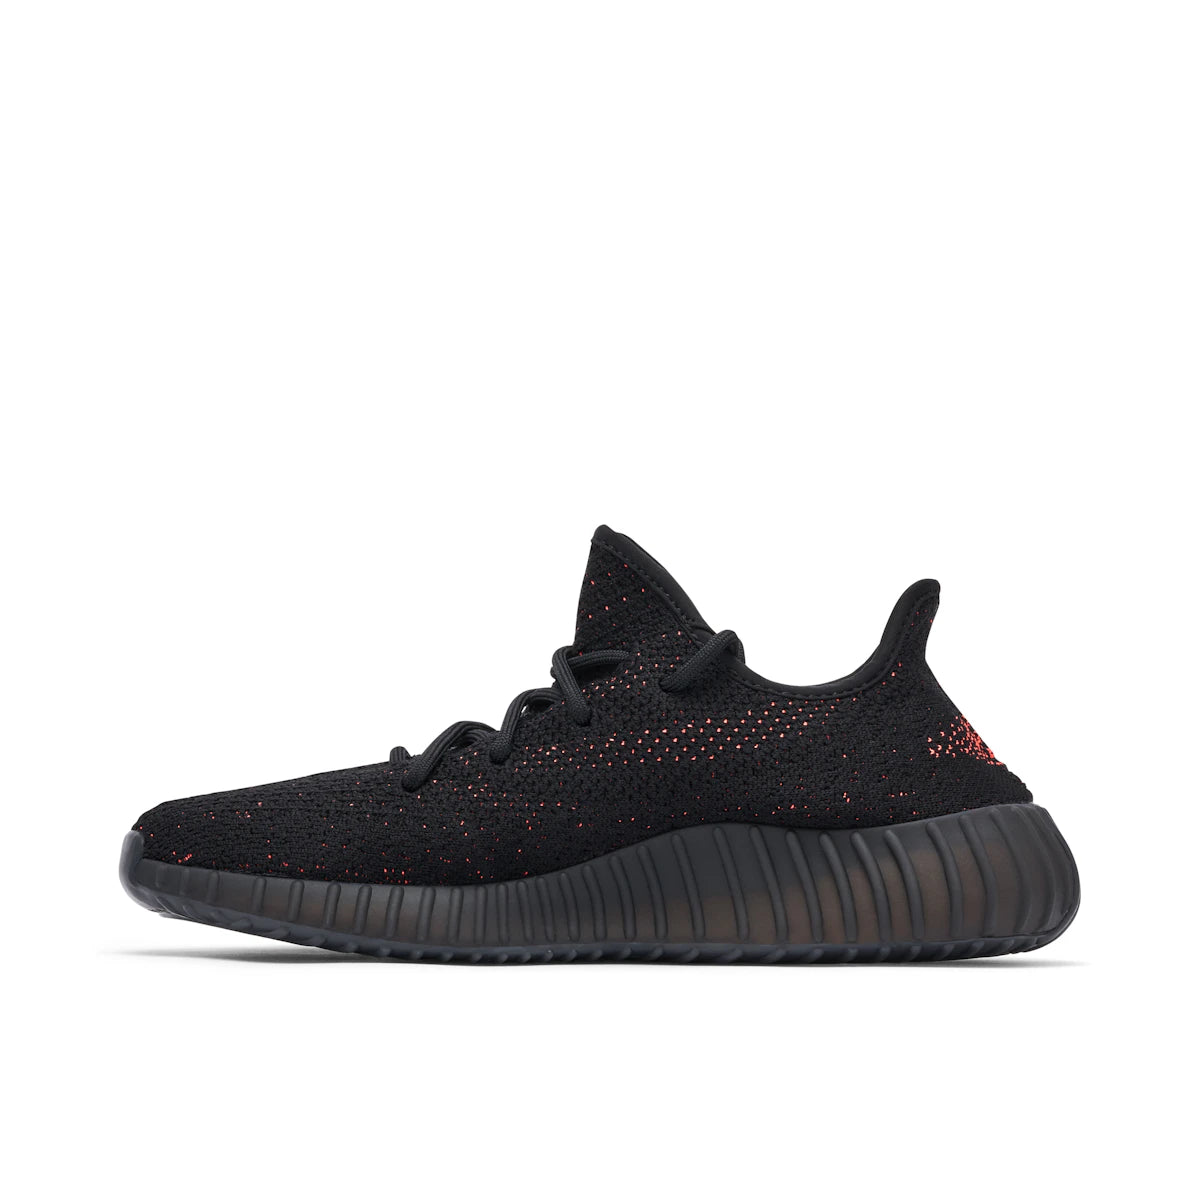 adidas Yeezy Boost 350 V2 Core Black Red (2022) by Yeezy from £248.00